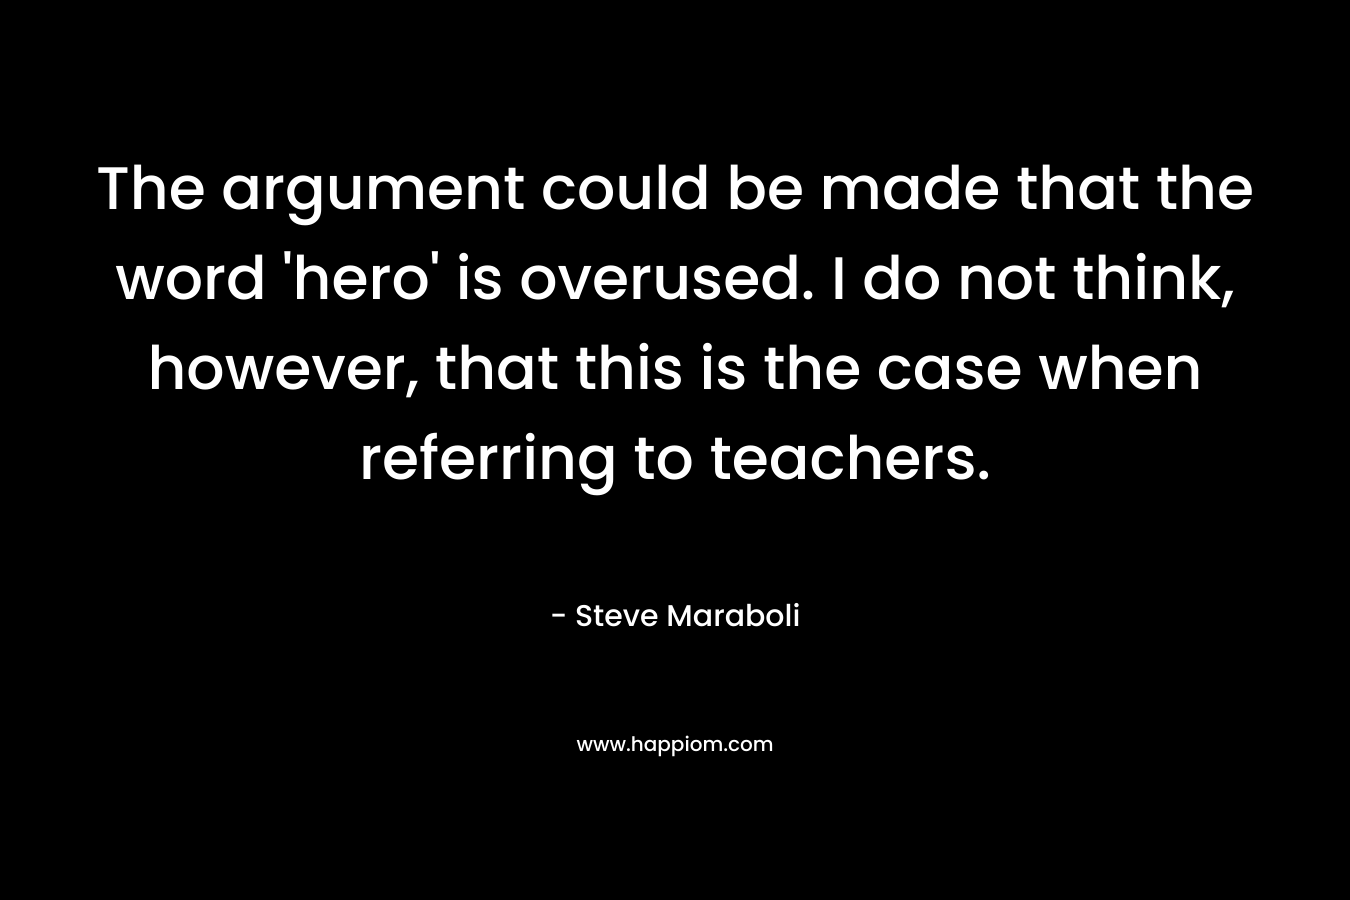 The argument could be made that the word ‘hero’ is overused. I do not think, however, that this is the case when referring to teachers. – Steve Maraboli